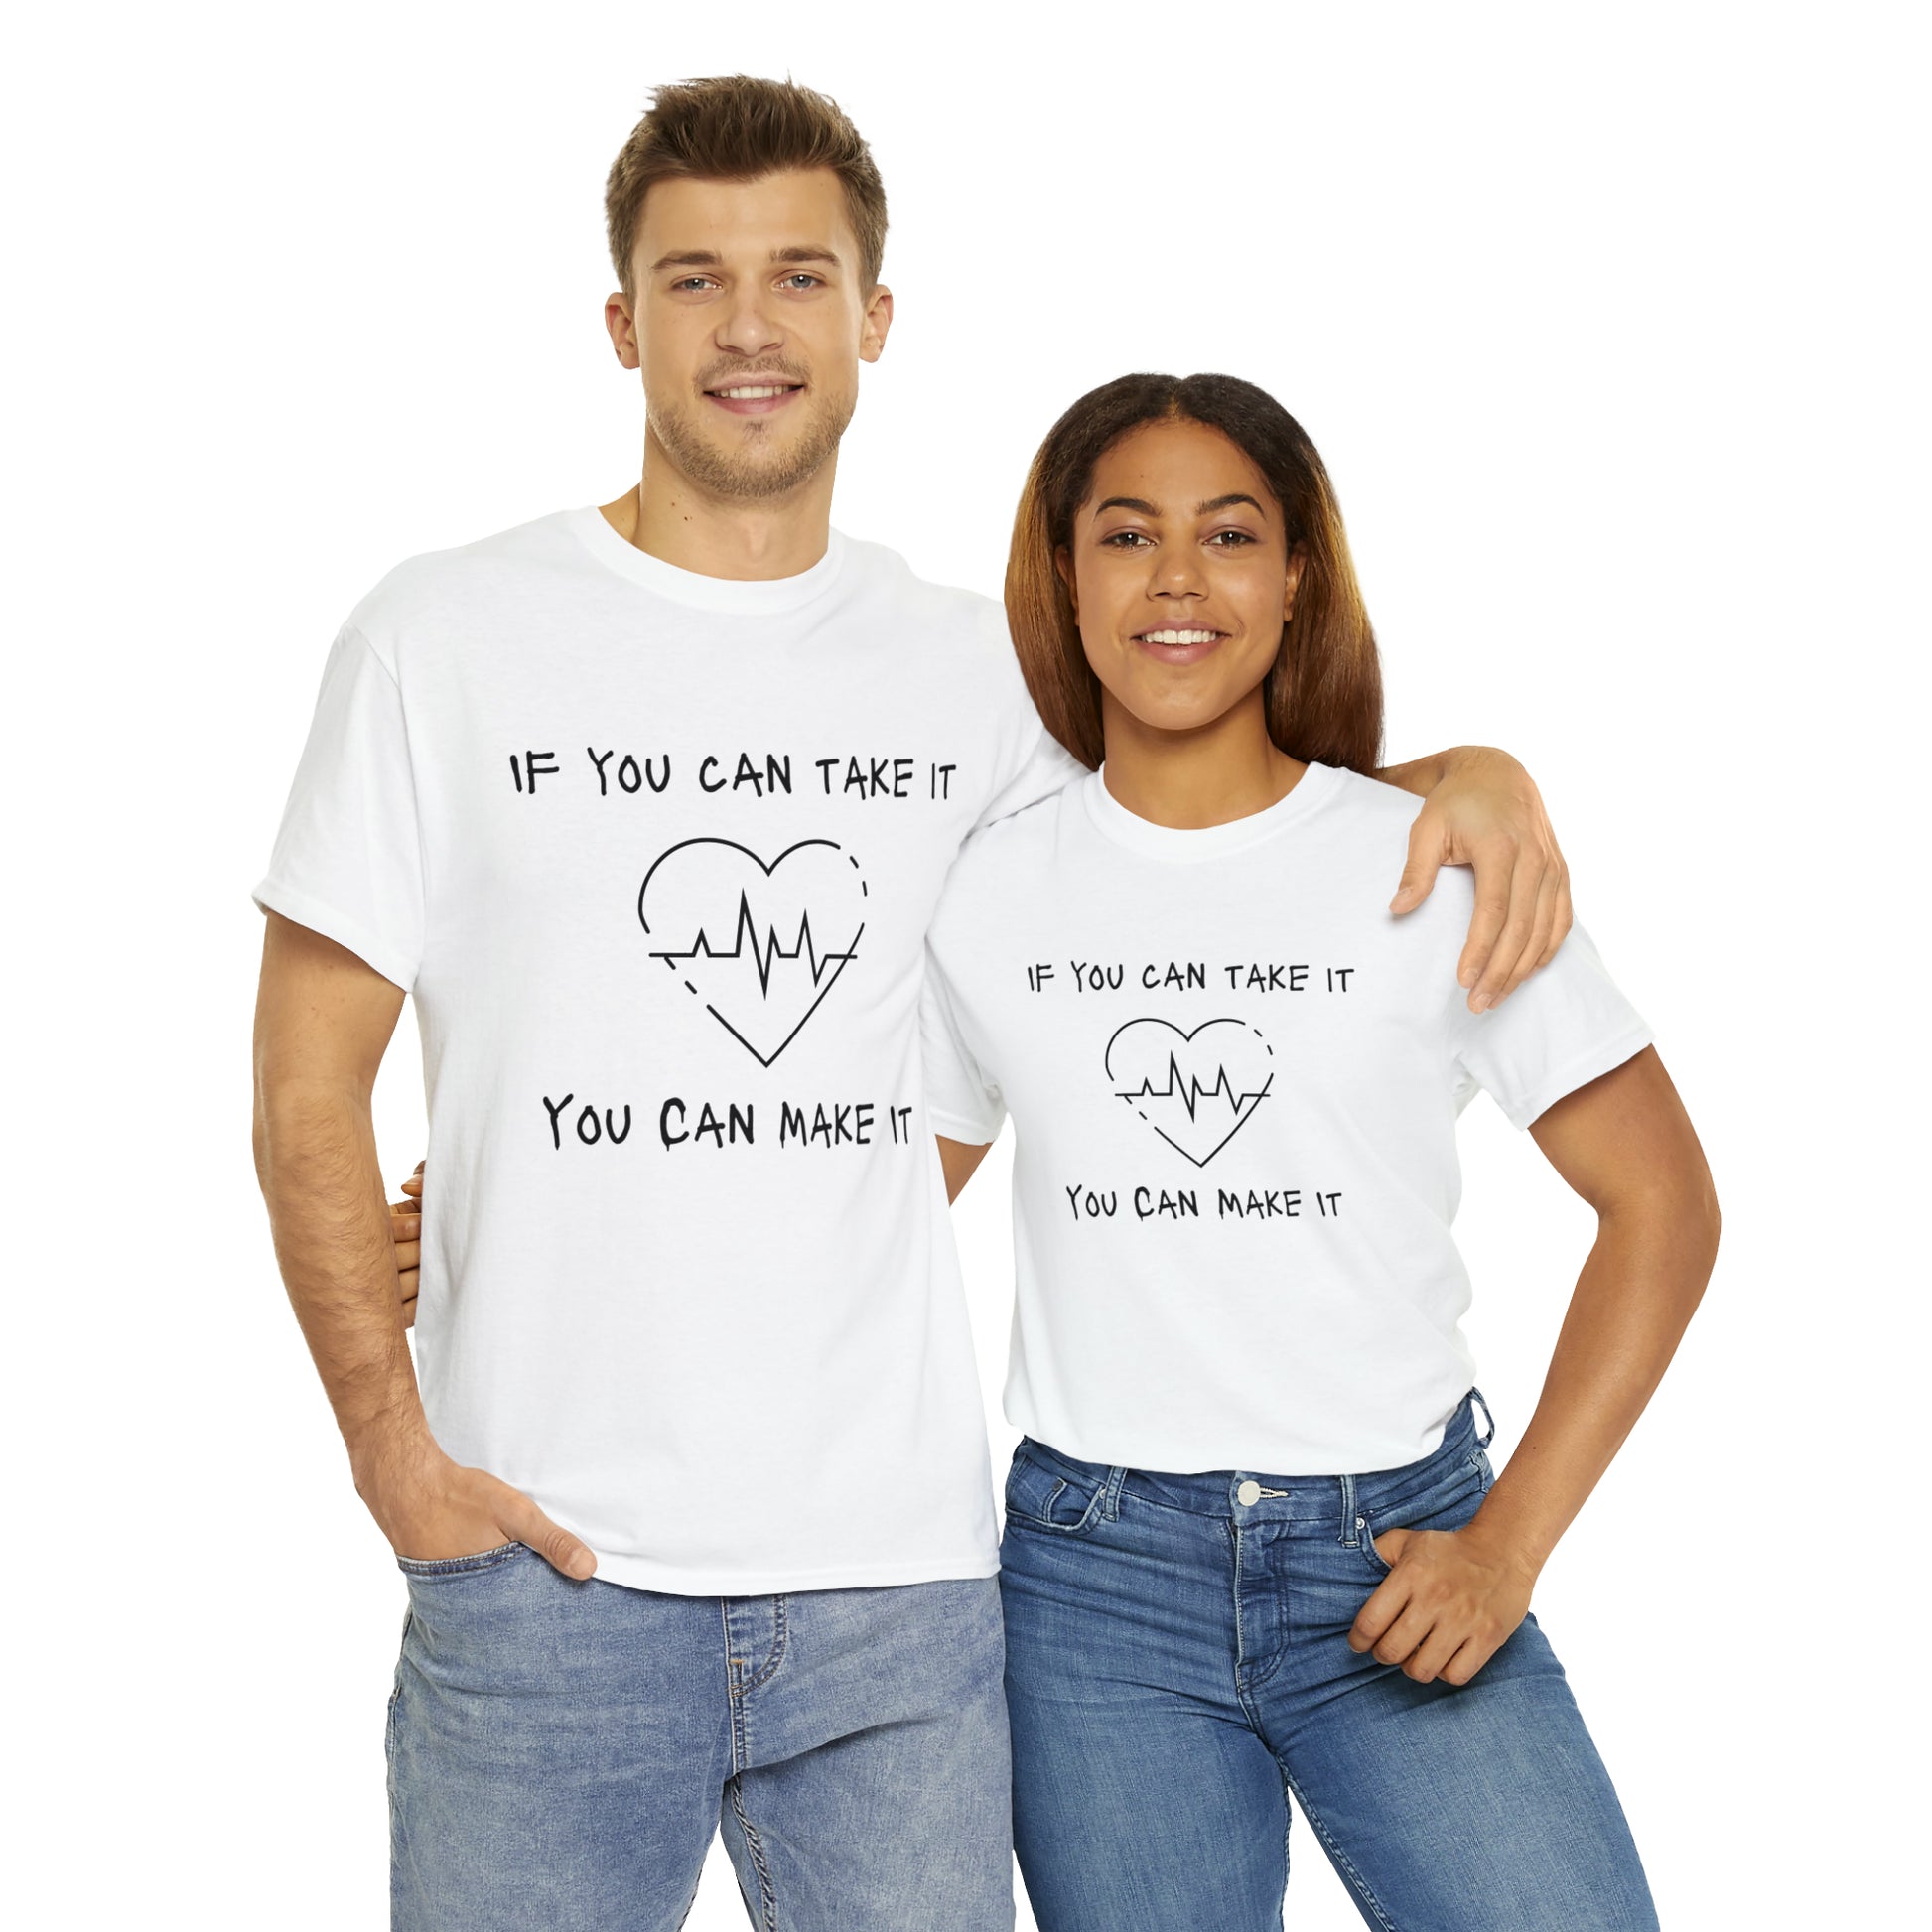 "If You Can Take It, You Can Make It" T-Shirt - Weave Got Gifts - Unique Gifts You Won’t Find Anywhere Else!